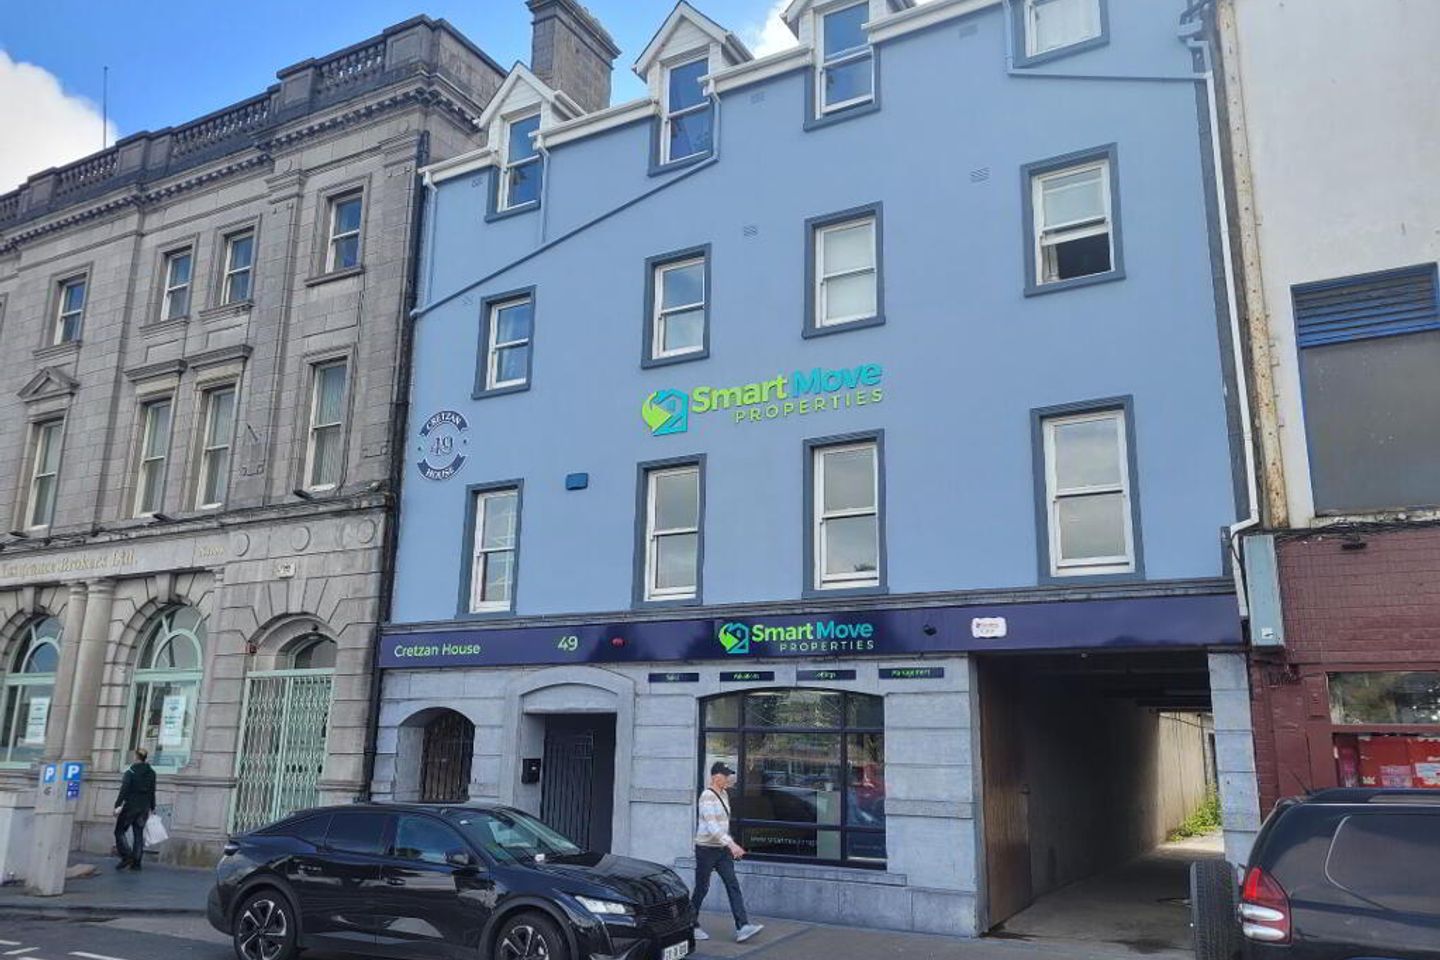 First Floor Offices, Cretzan House,49 The Quay, Waterford City, Co. Waterford